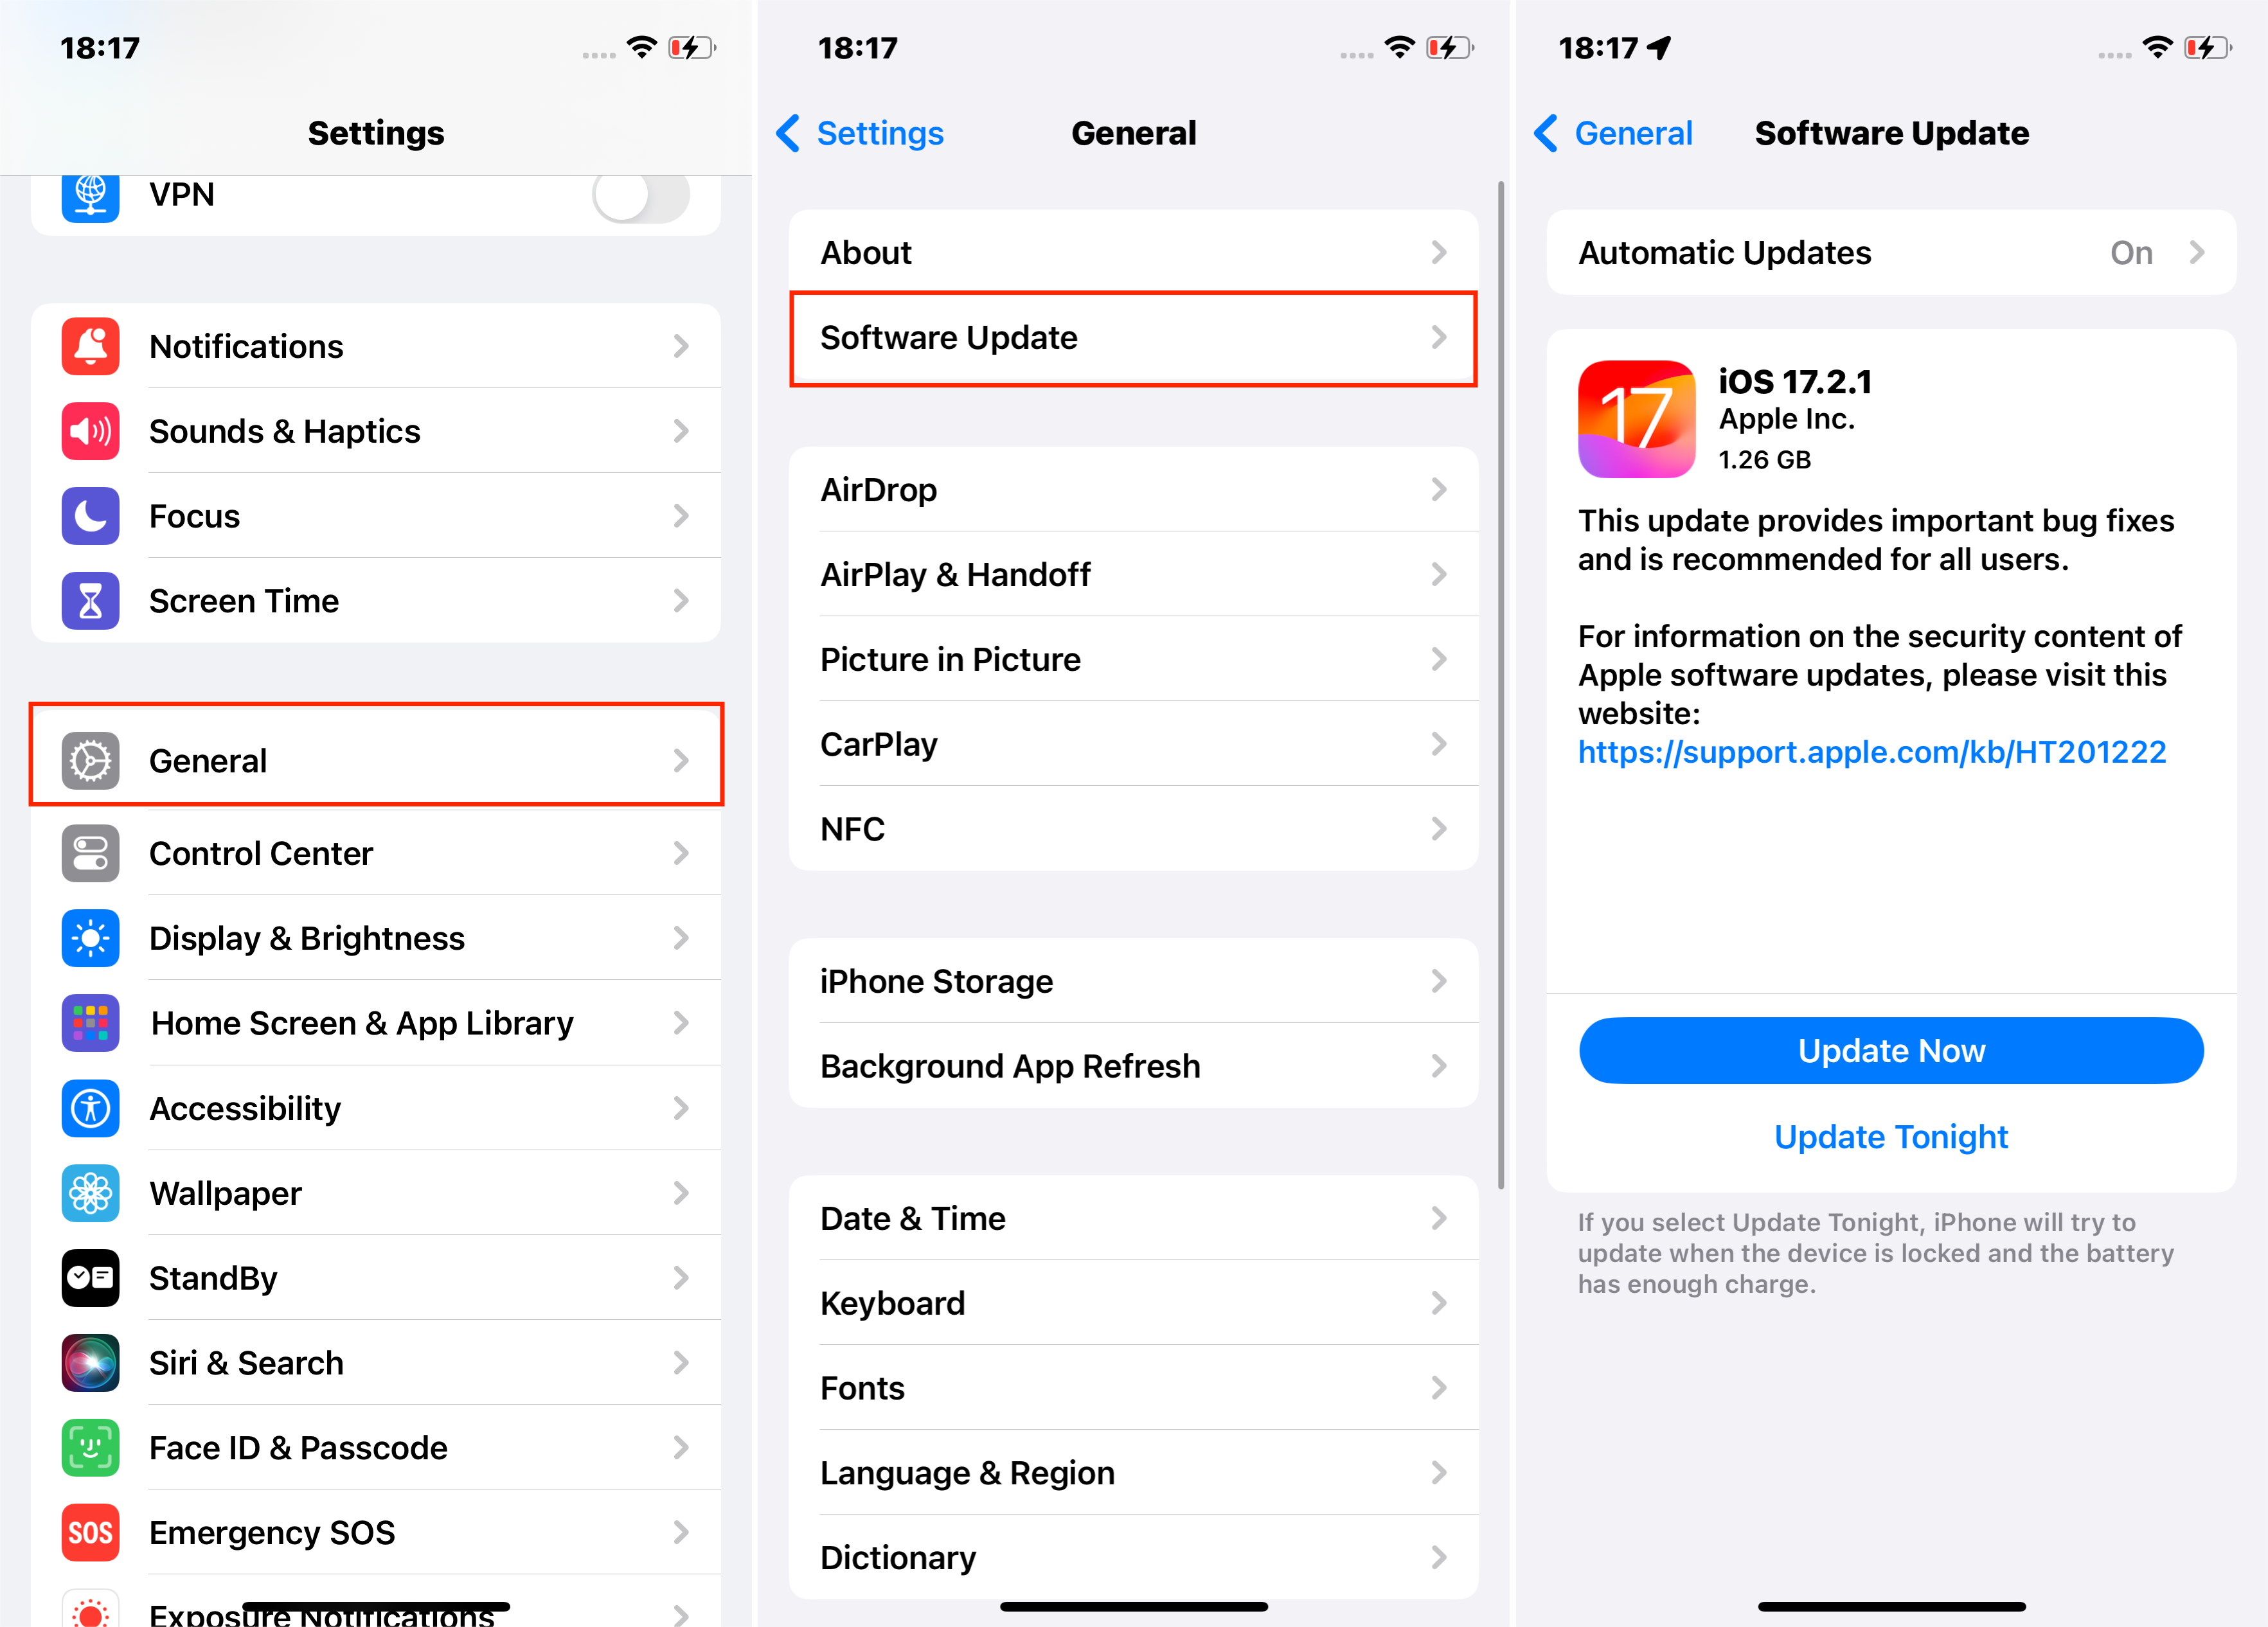 Download and Install the Latest iOS Update